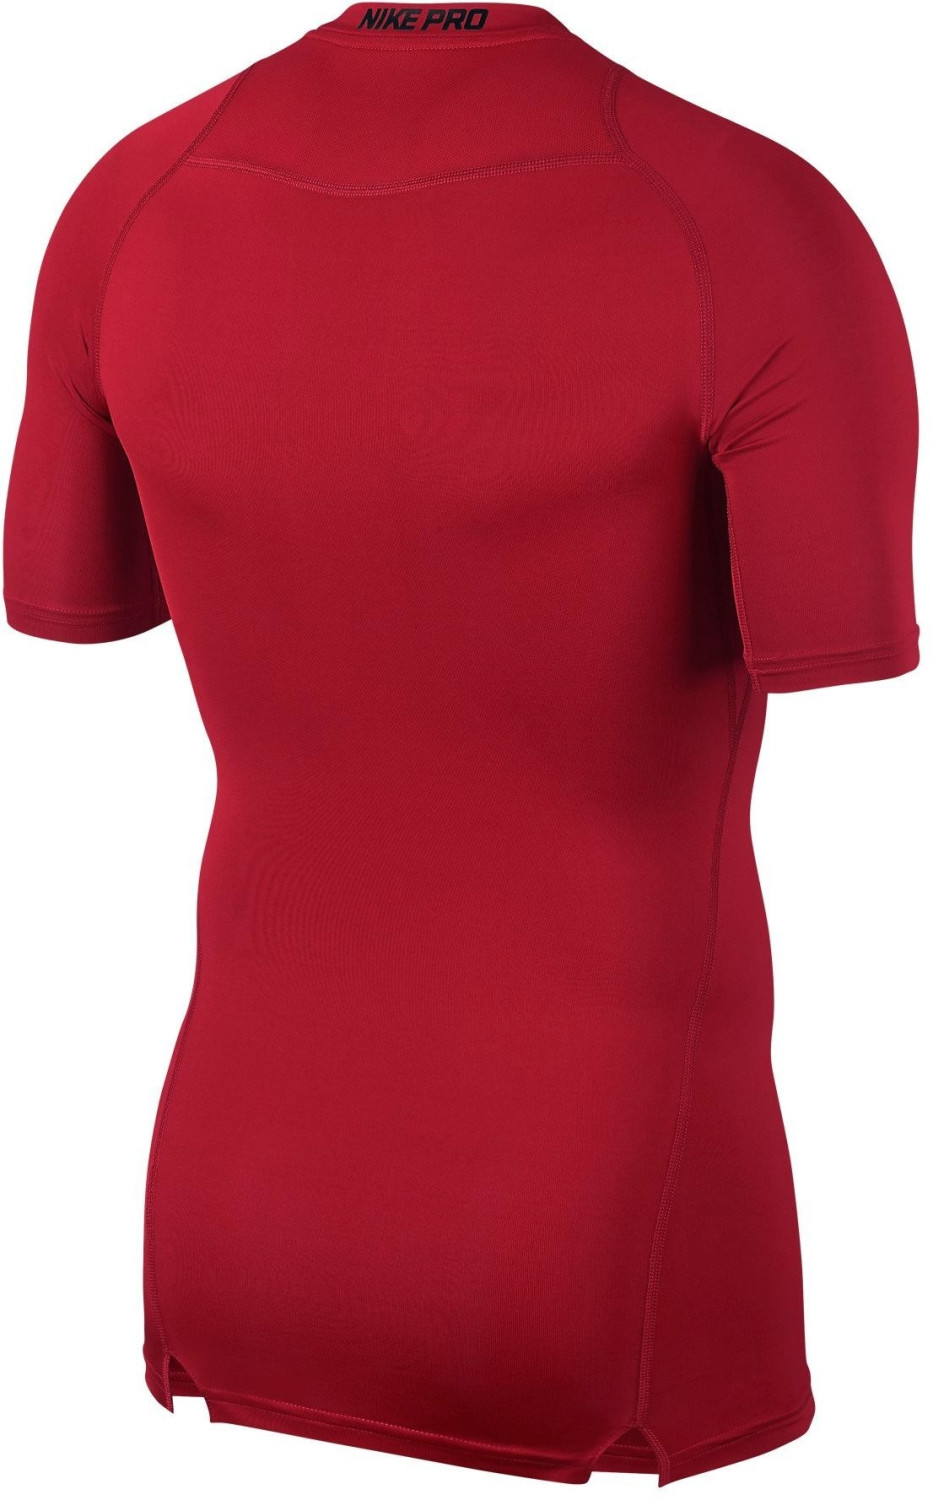 Nike PRO Core Compression Shirt (838091) red ab 30,00 â¬ | Preisvergleich bei idealo.de